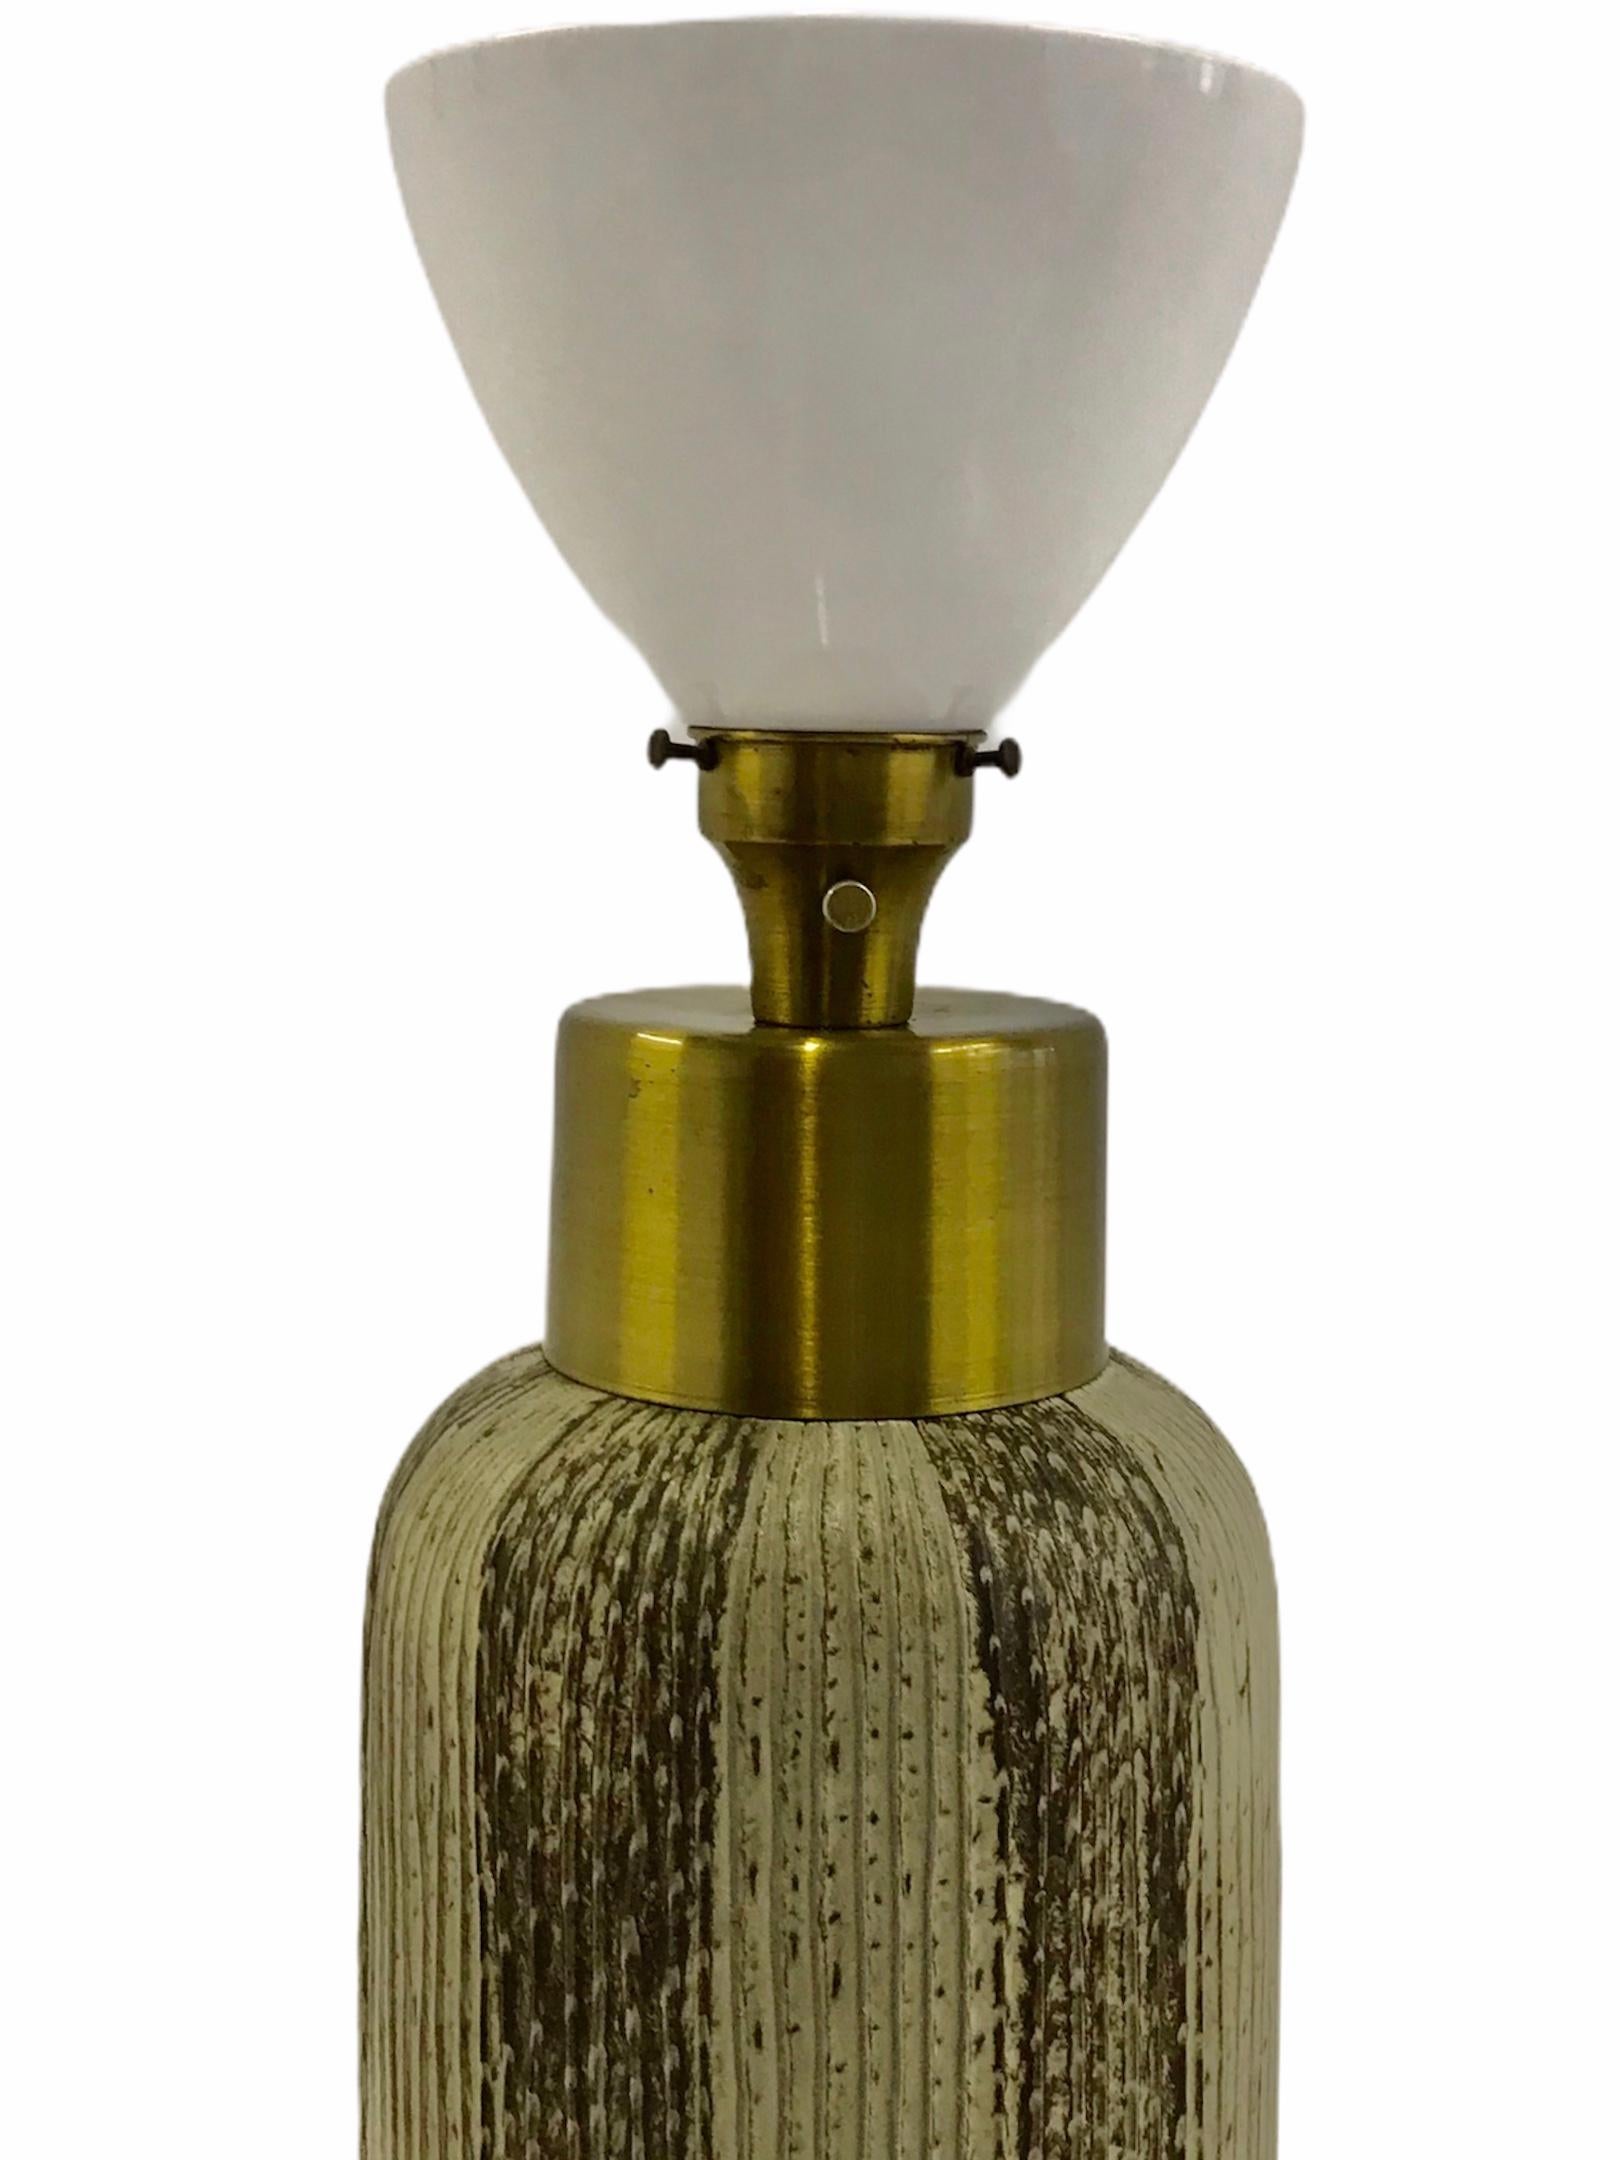 Exhibiting a textural pottery form in brown and grey tones in the style of Claude Conover, this table Lamp with brass mounts and a milk glass diffuser is a 1950s delight. Sophisticated and elegant, it is masculine and modern. With all original